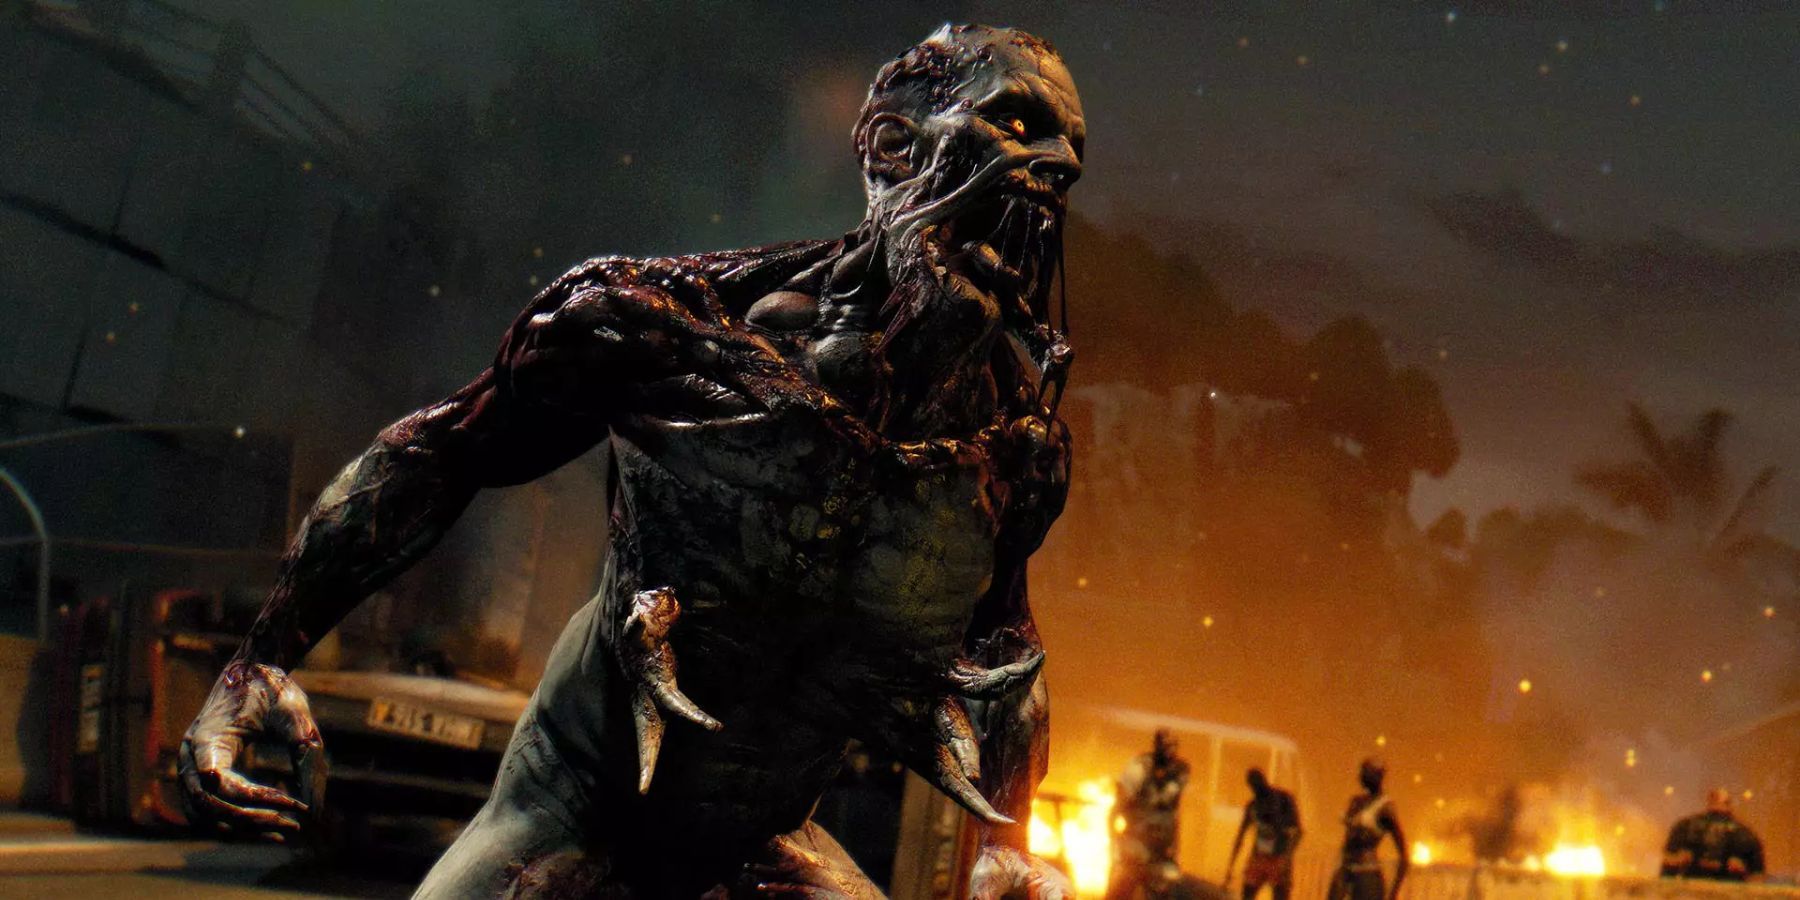 Dying Light Definitive Edition Announced, Free Upgrade With All DLC's &  More